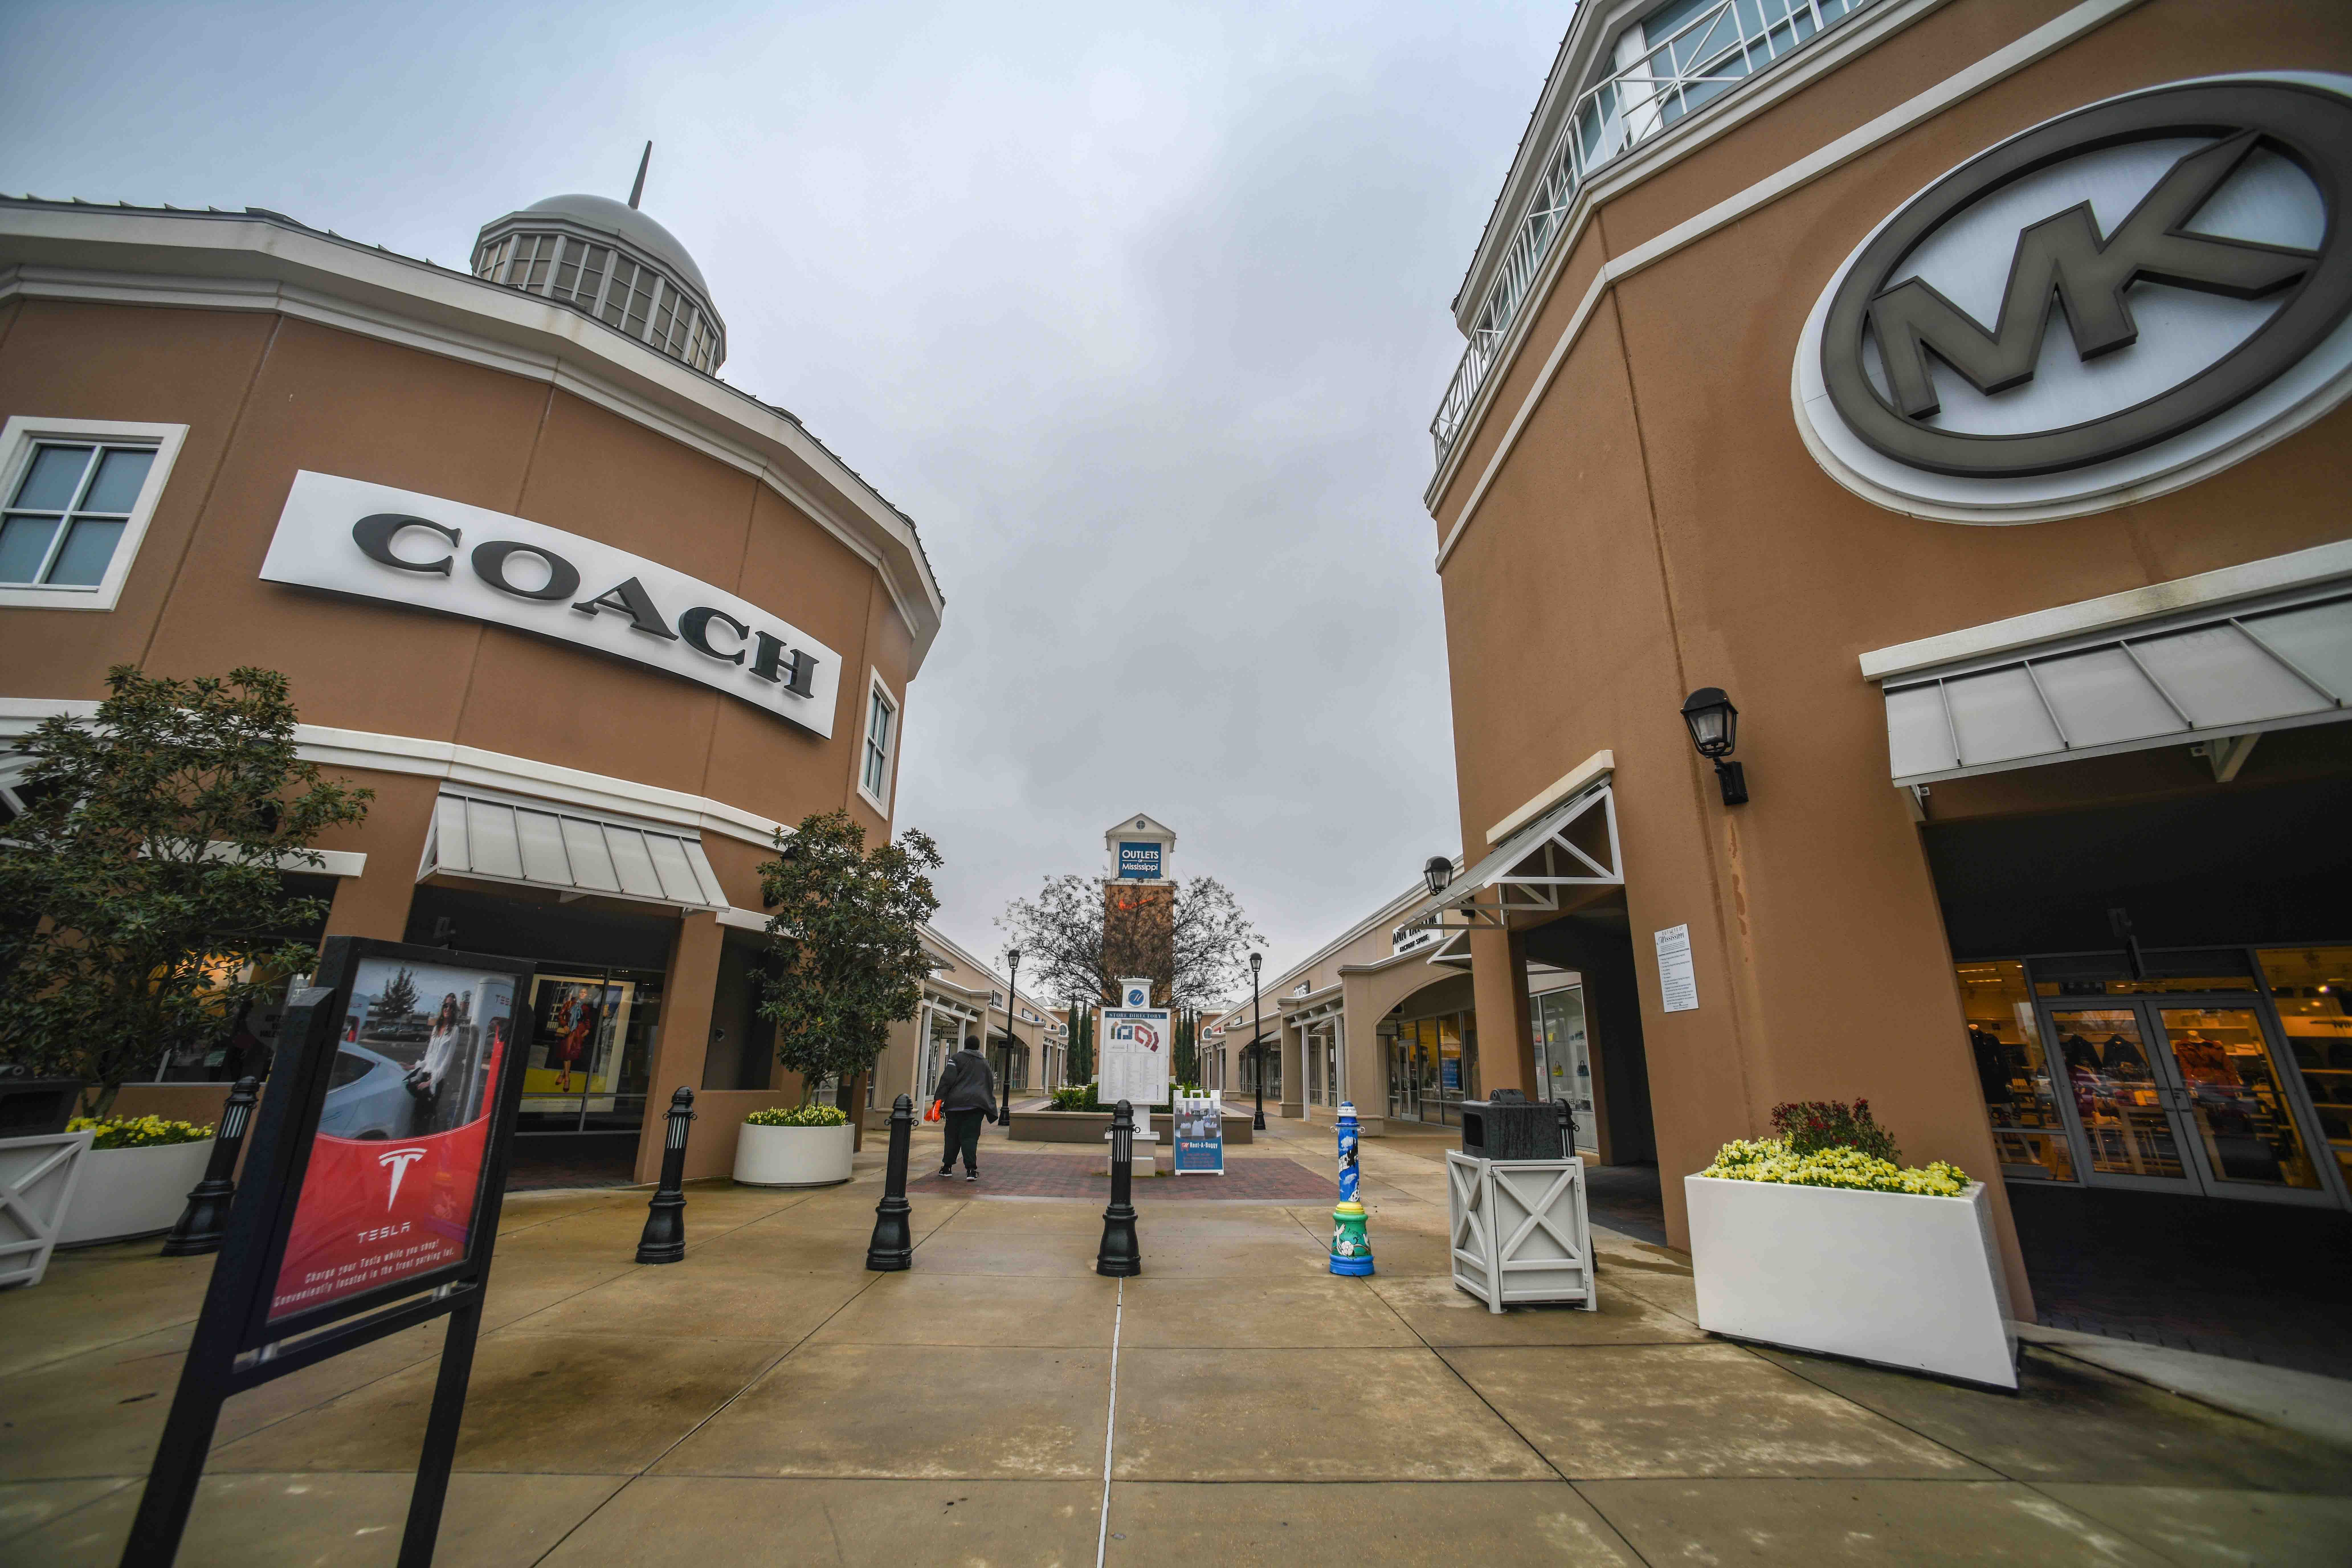 outlets of mississippi nike store